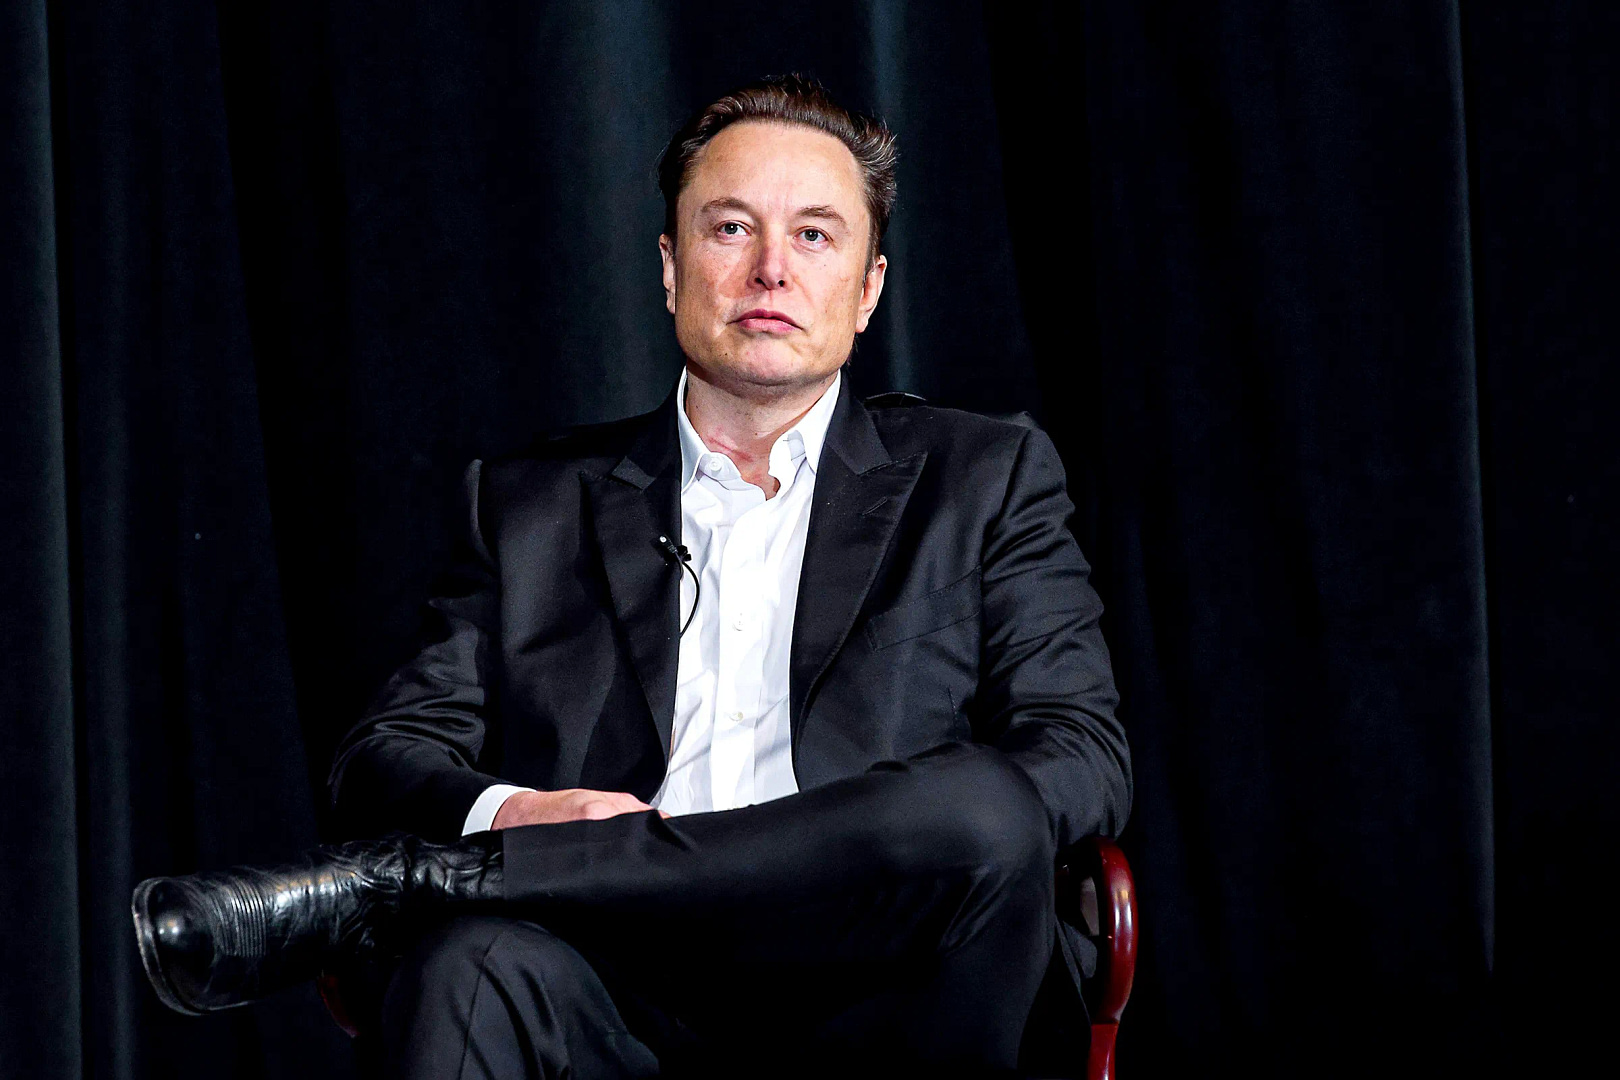 Elon Musk - Founder of SpaceX, Tesla, and other companies